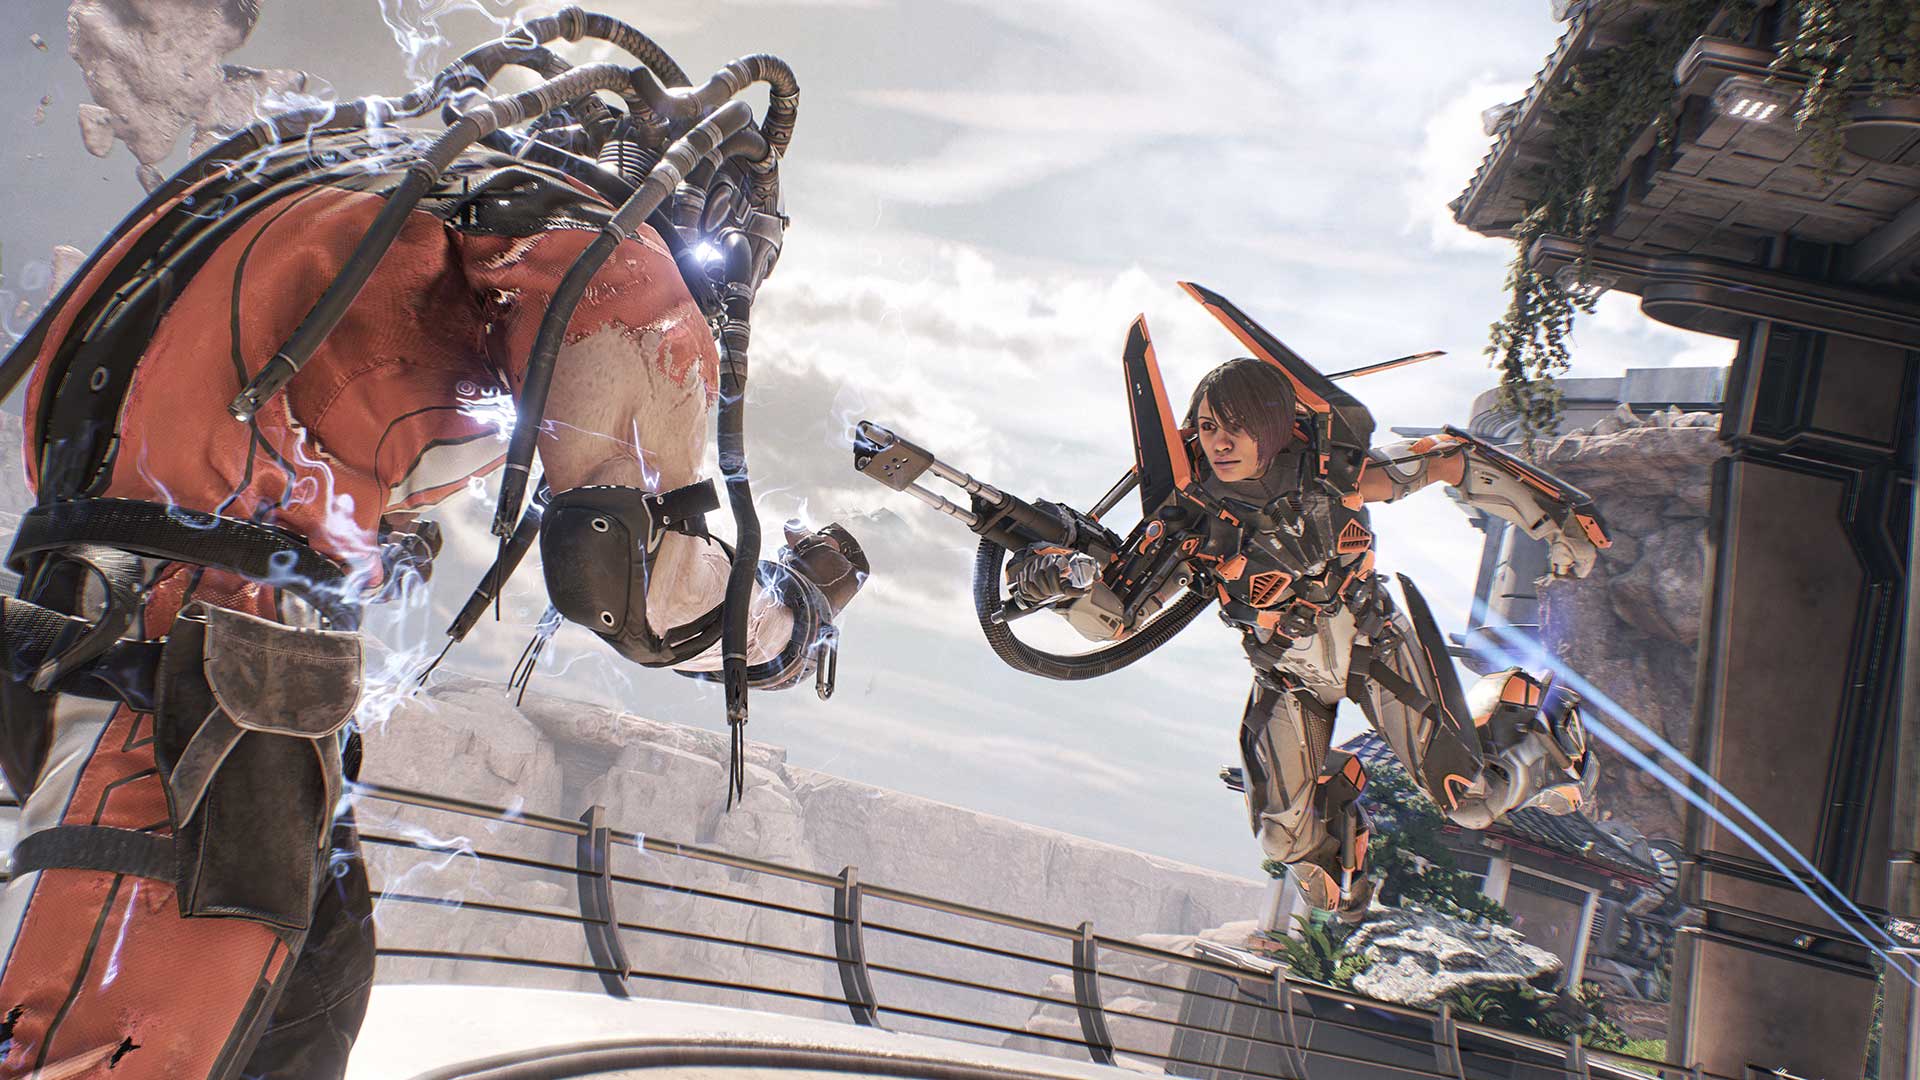 Image for LawBreakers coming to PS4 as budget title - all future updates will be free